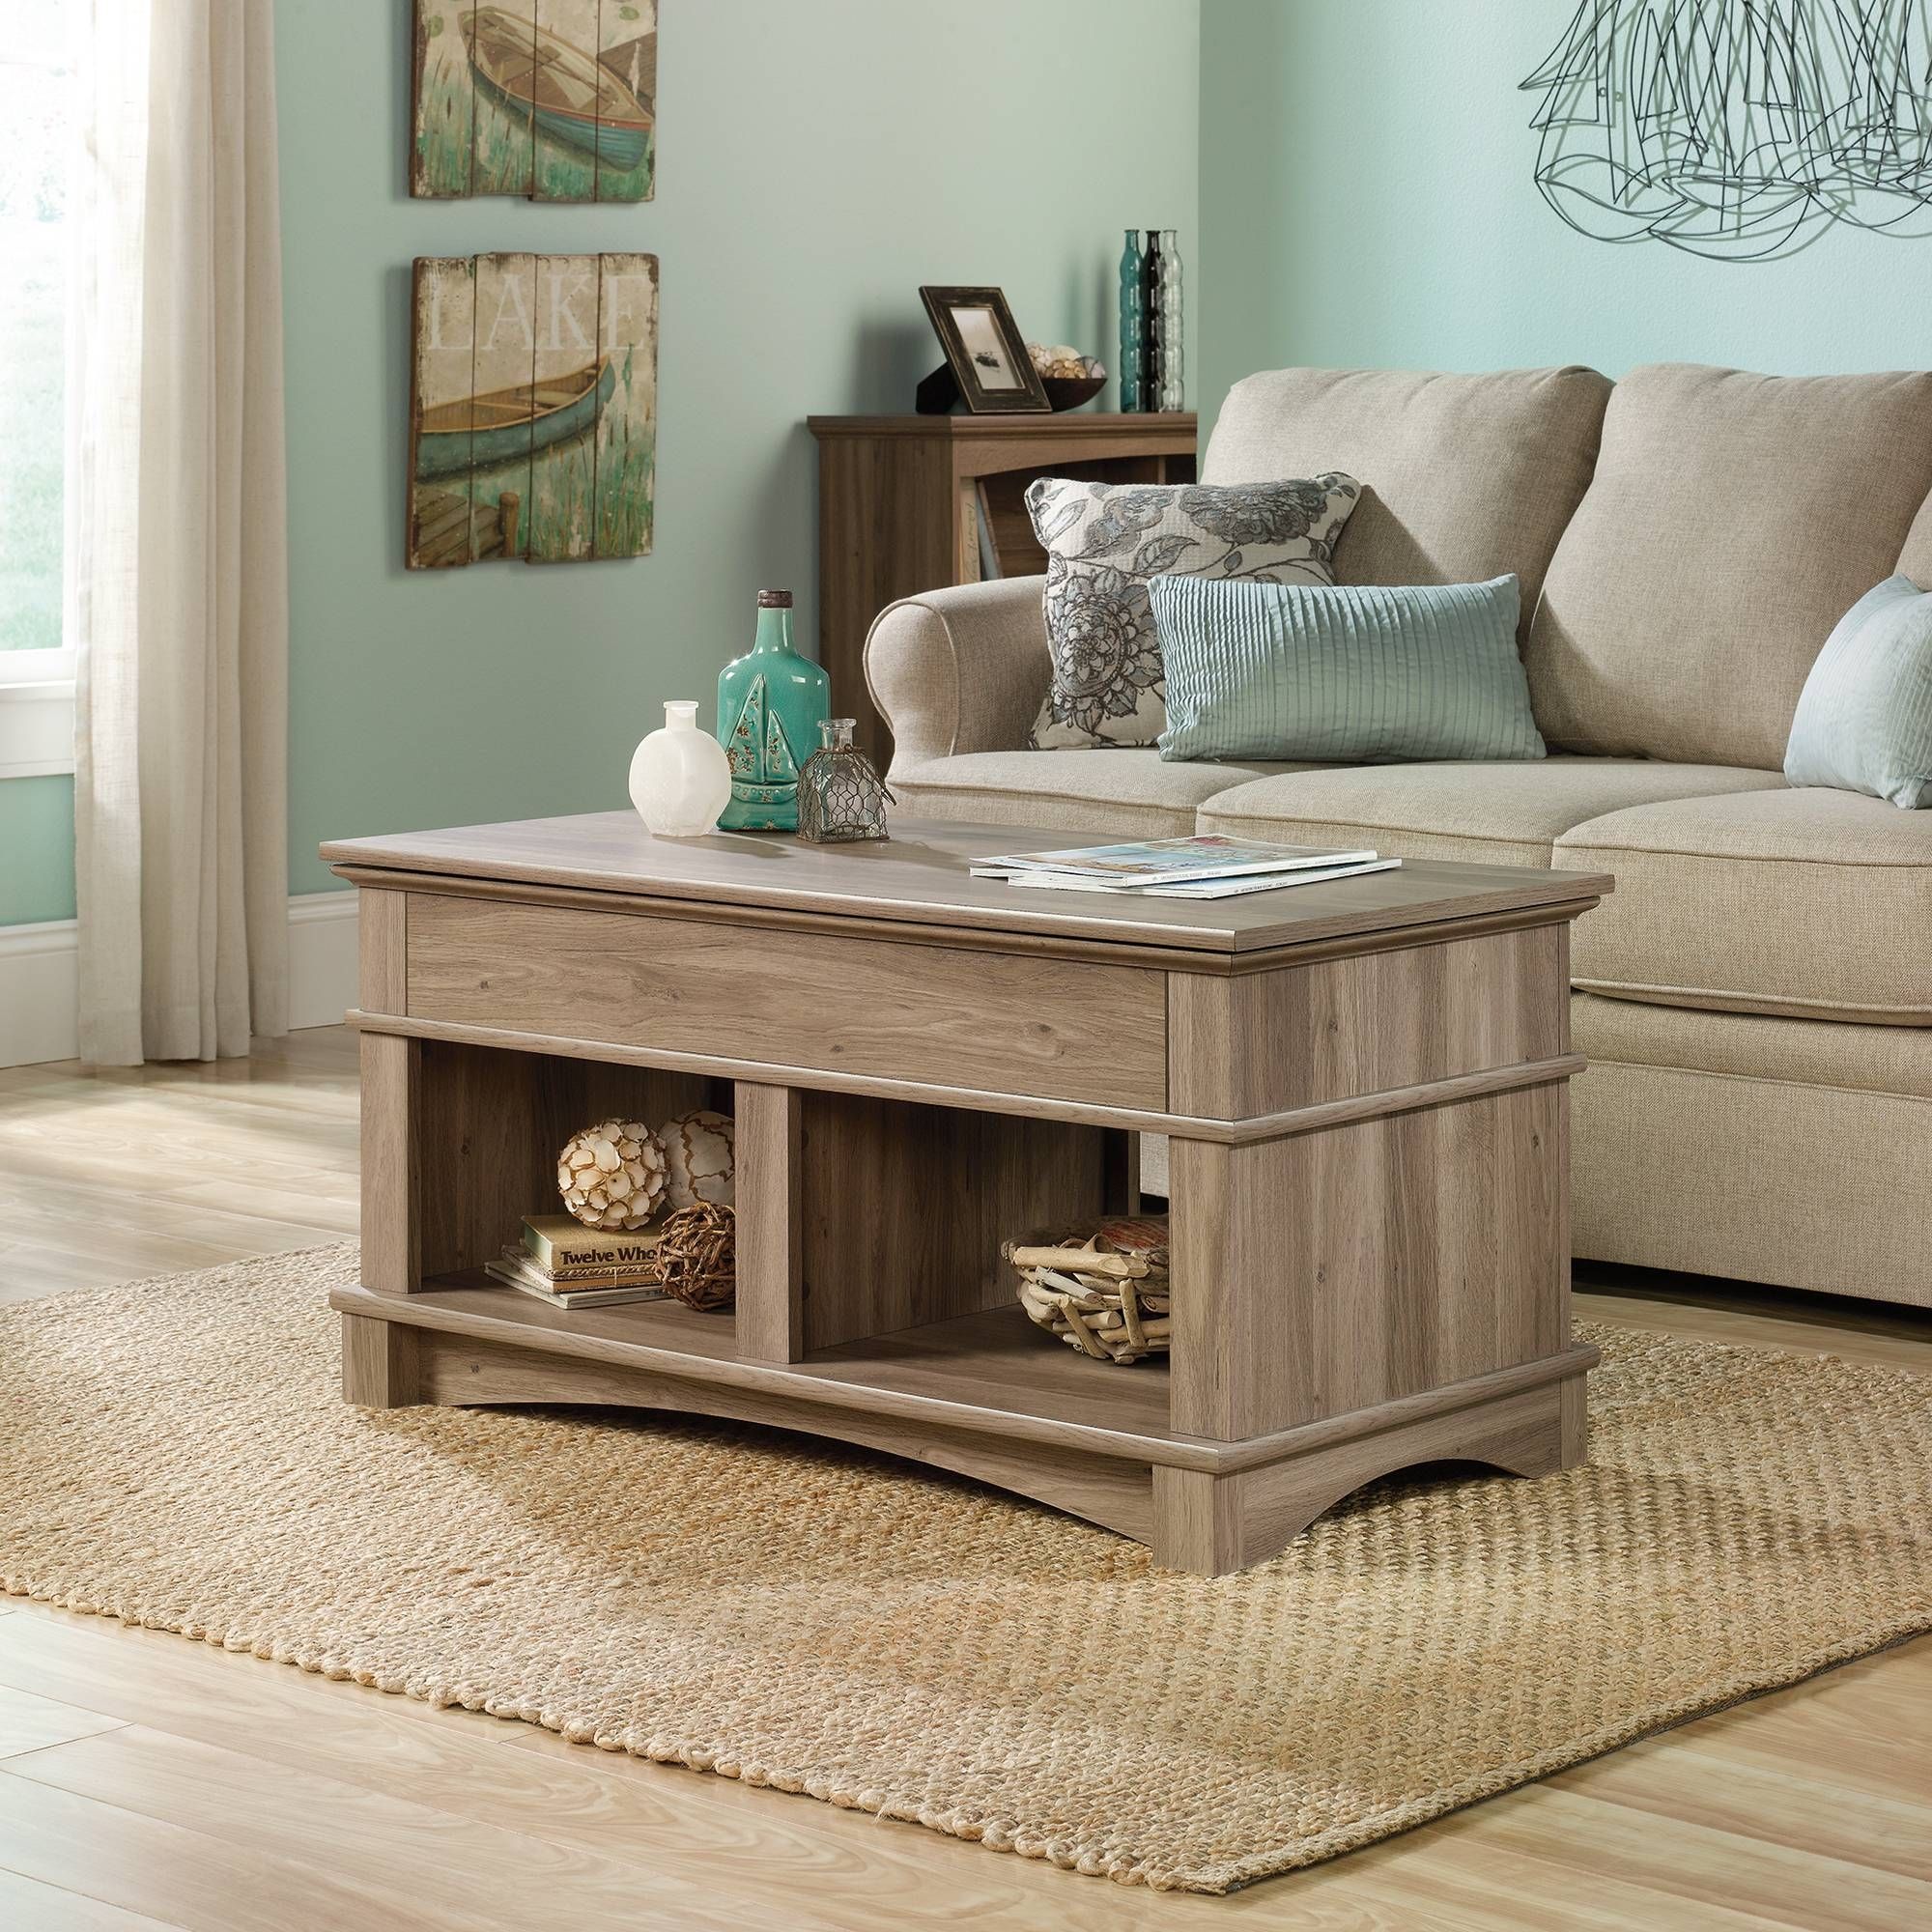 Harbor View | Lift Top Coffee Table | 420329 | Sauder Throughout Lift Top Oak Coffee Tables (View 8 of 30)